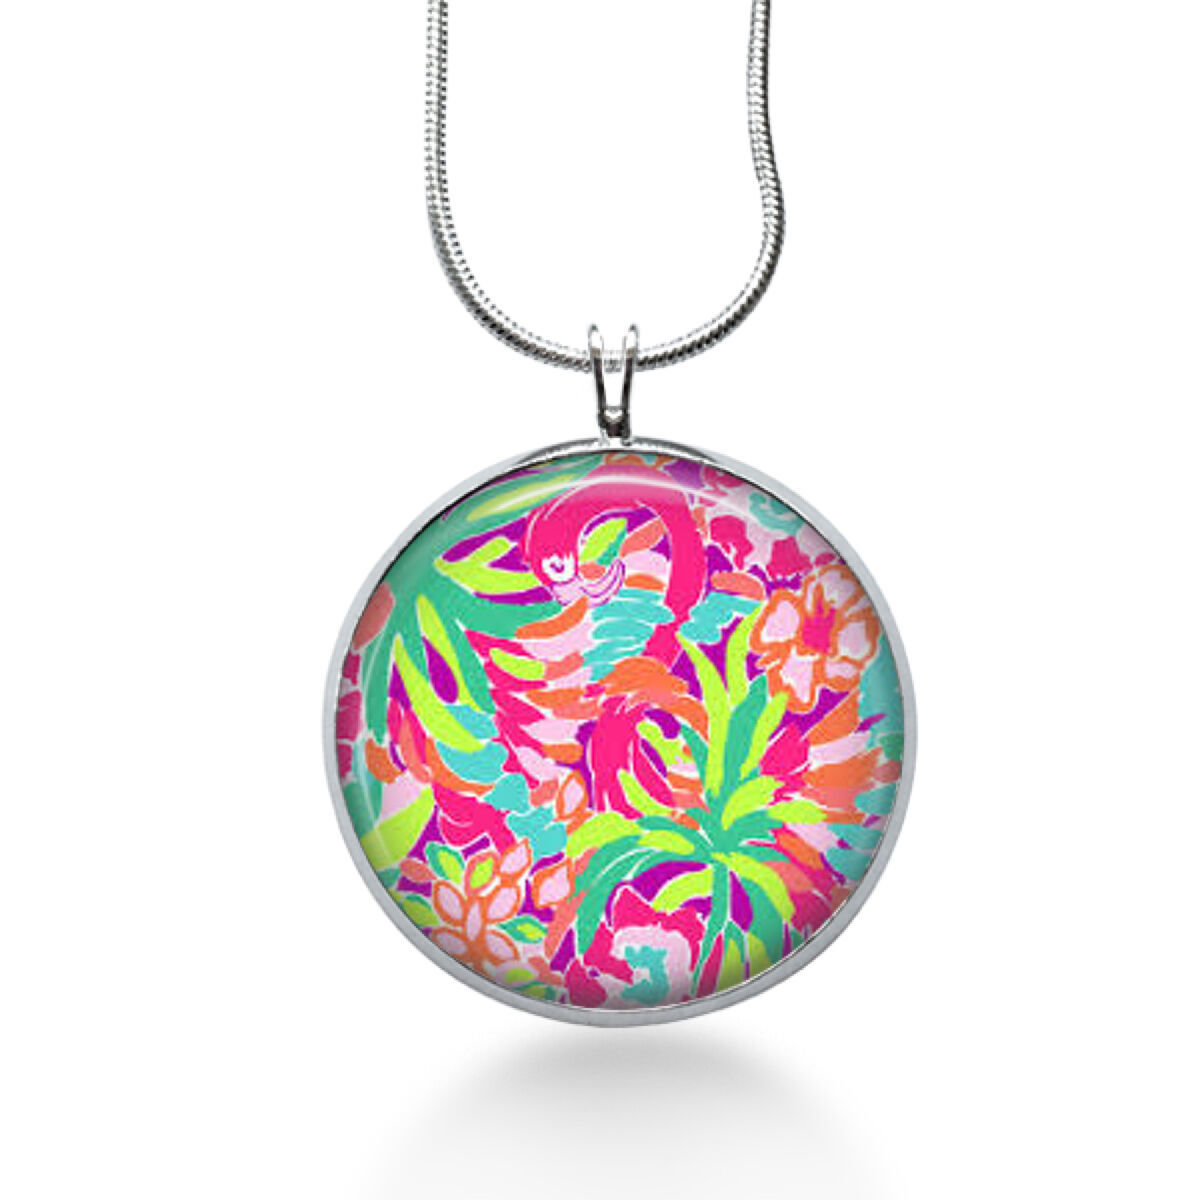 Swan necklace - lilly pulitzer inspired fabric - pink swans, beach pendant, swan - $18.32